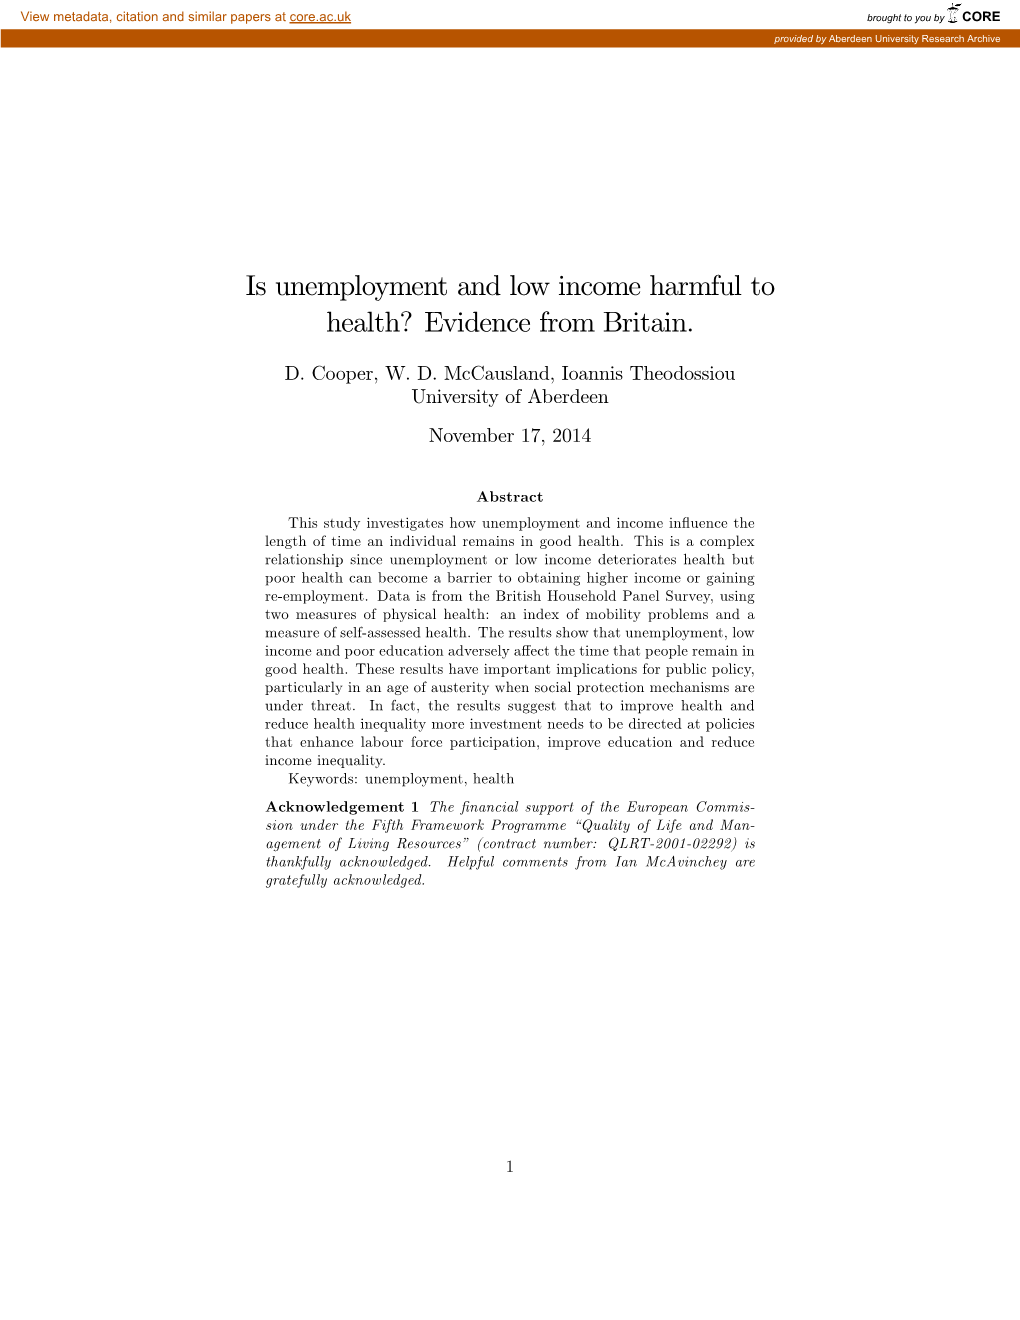 Is Unemployment and Low Income Harmful to Health? Evidence from Britain